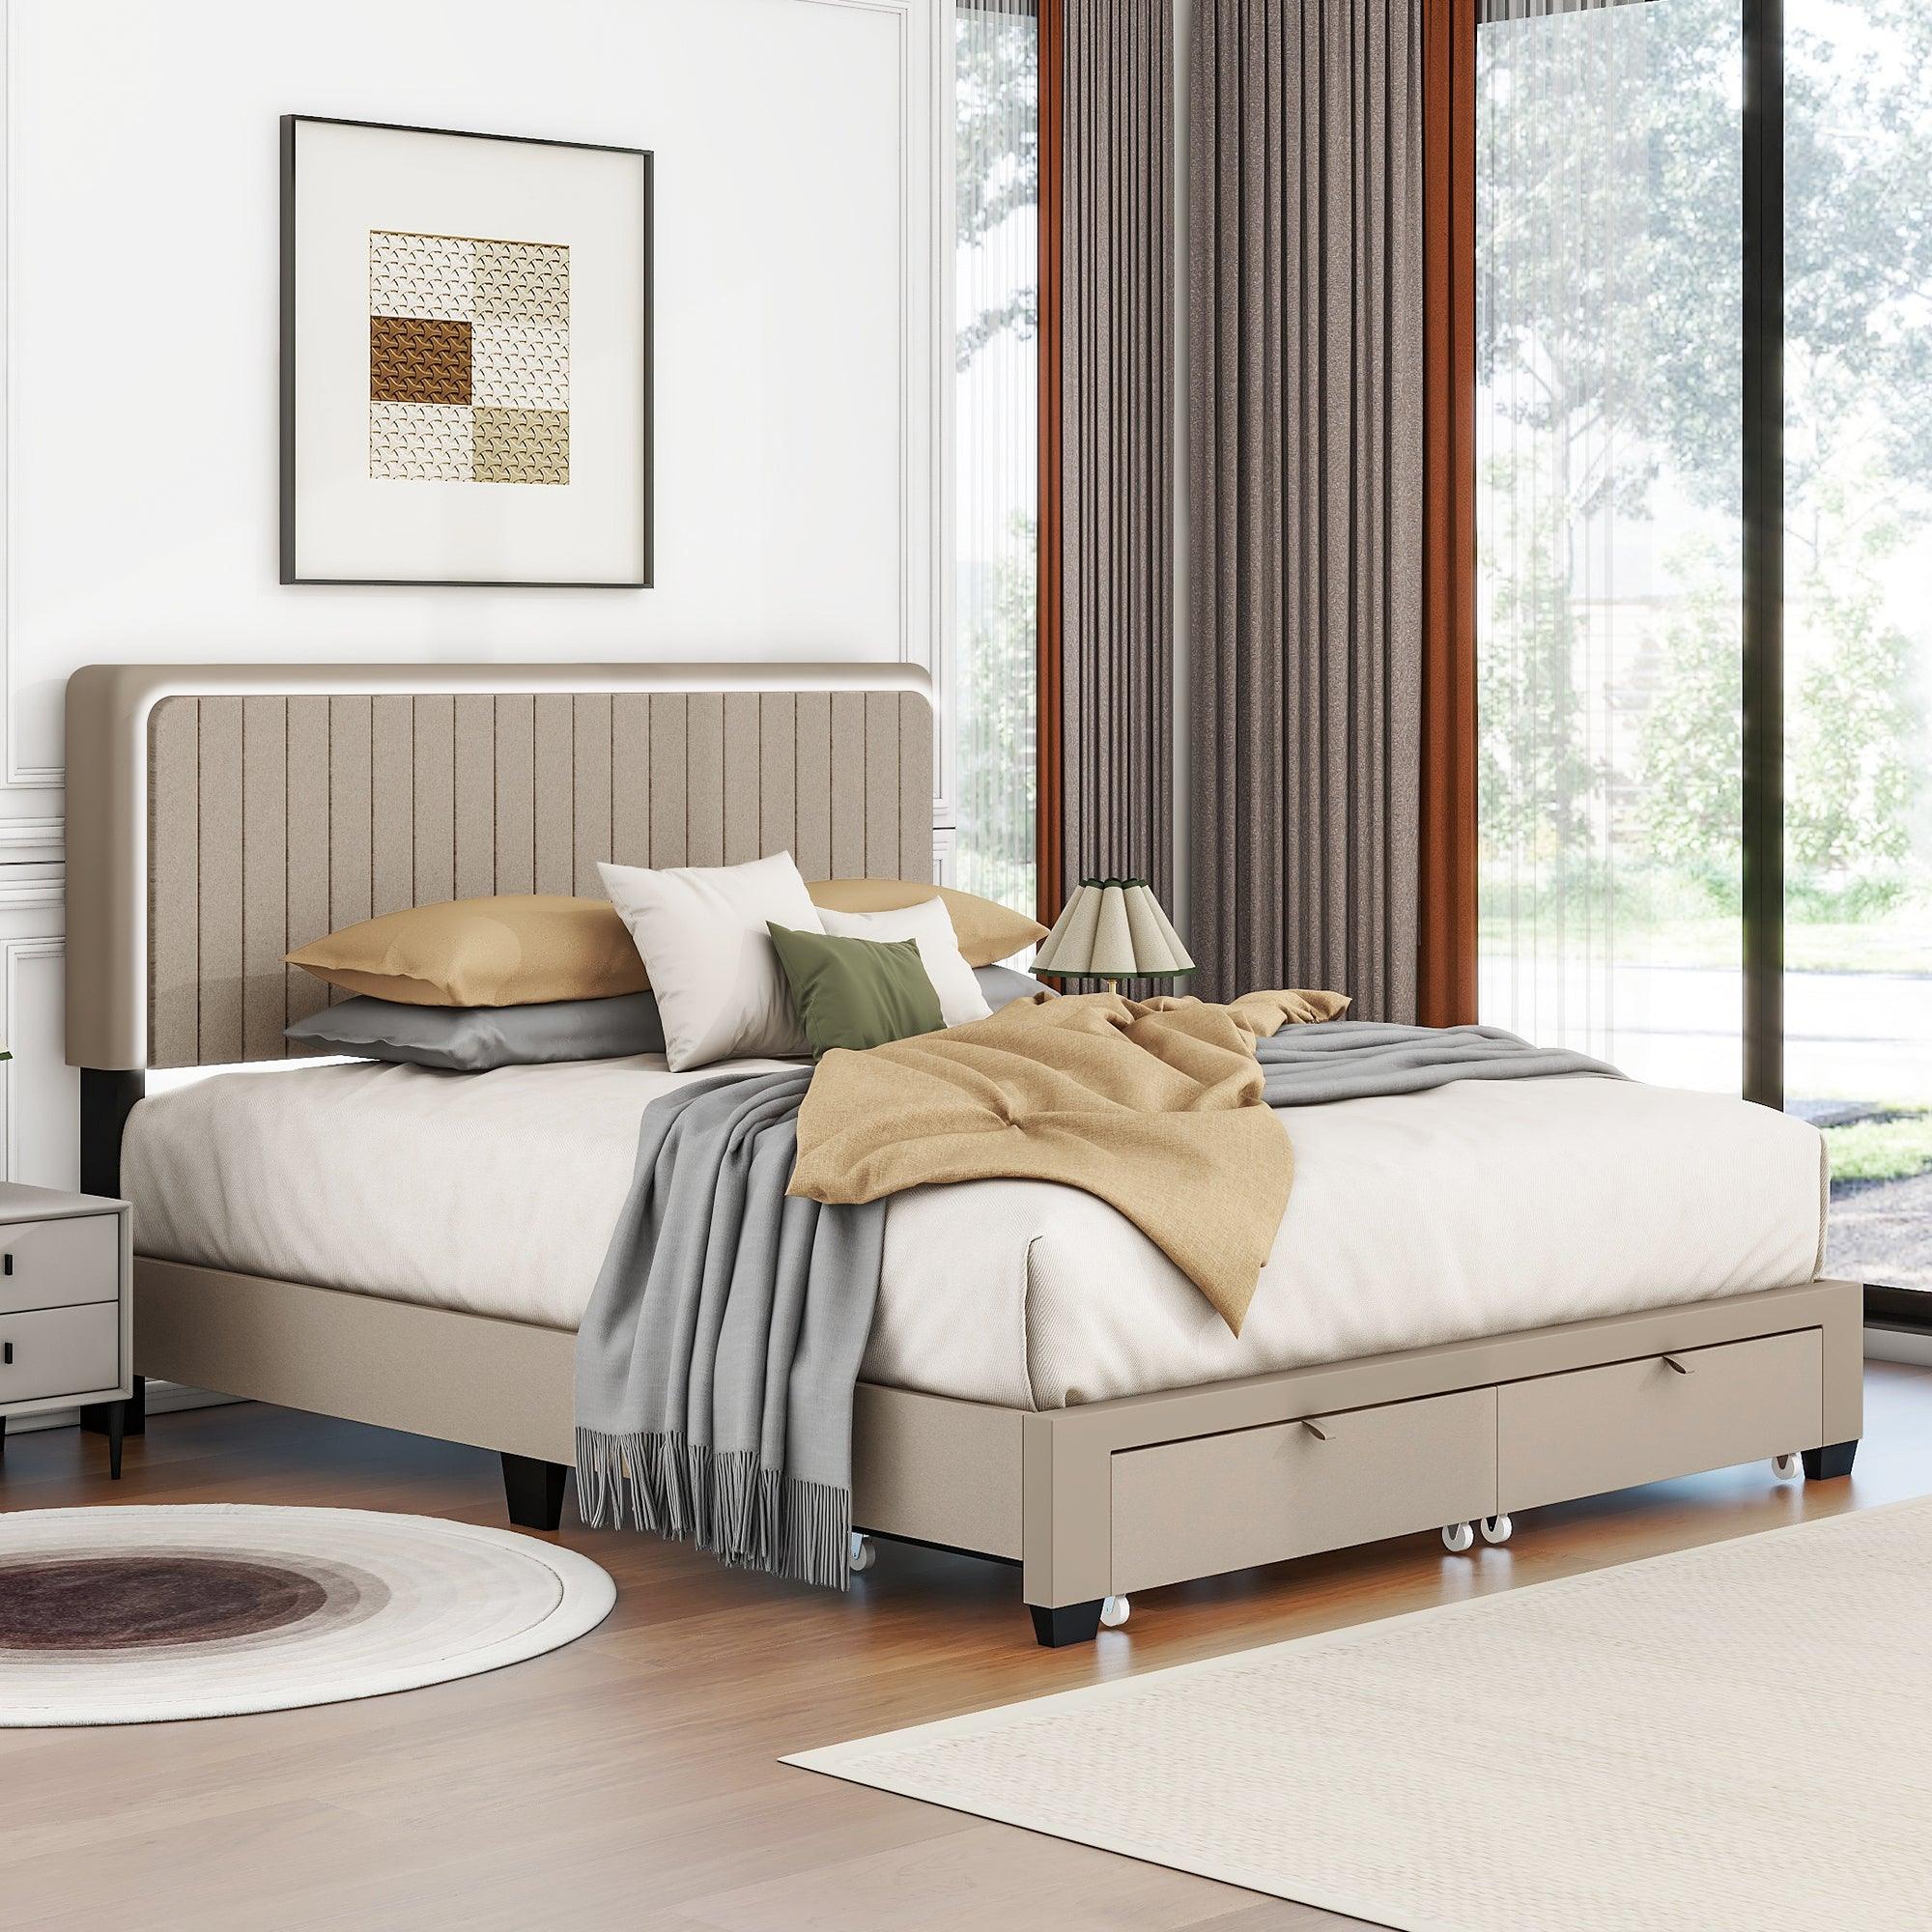 🆓🚛 Queen Size Upholstered Bed With Adjustable Height, Led Design With Footboard Drawers Storage, Beige